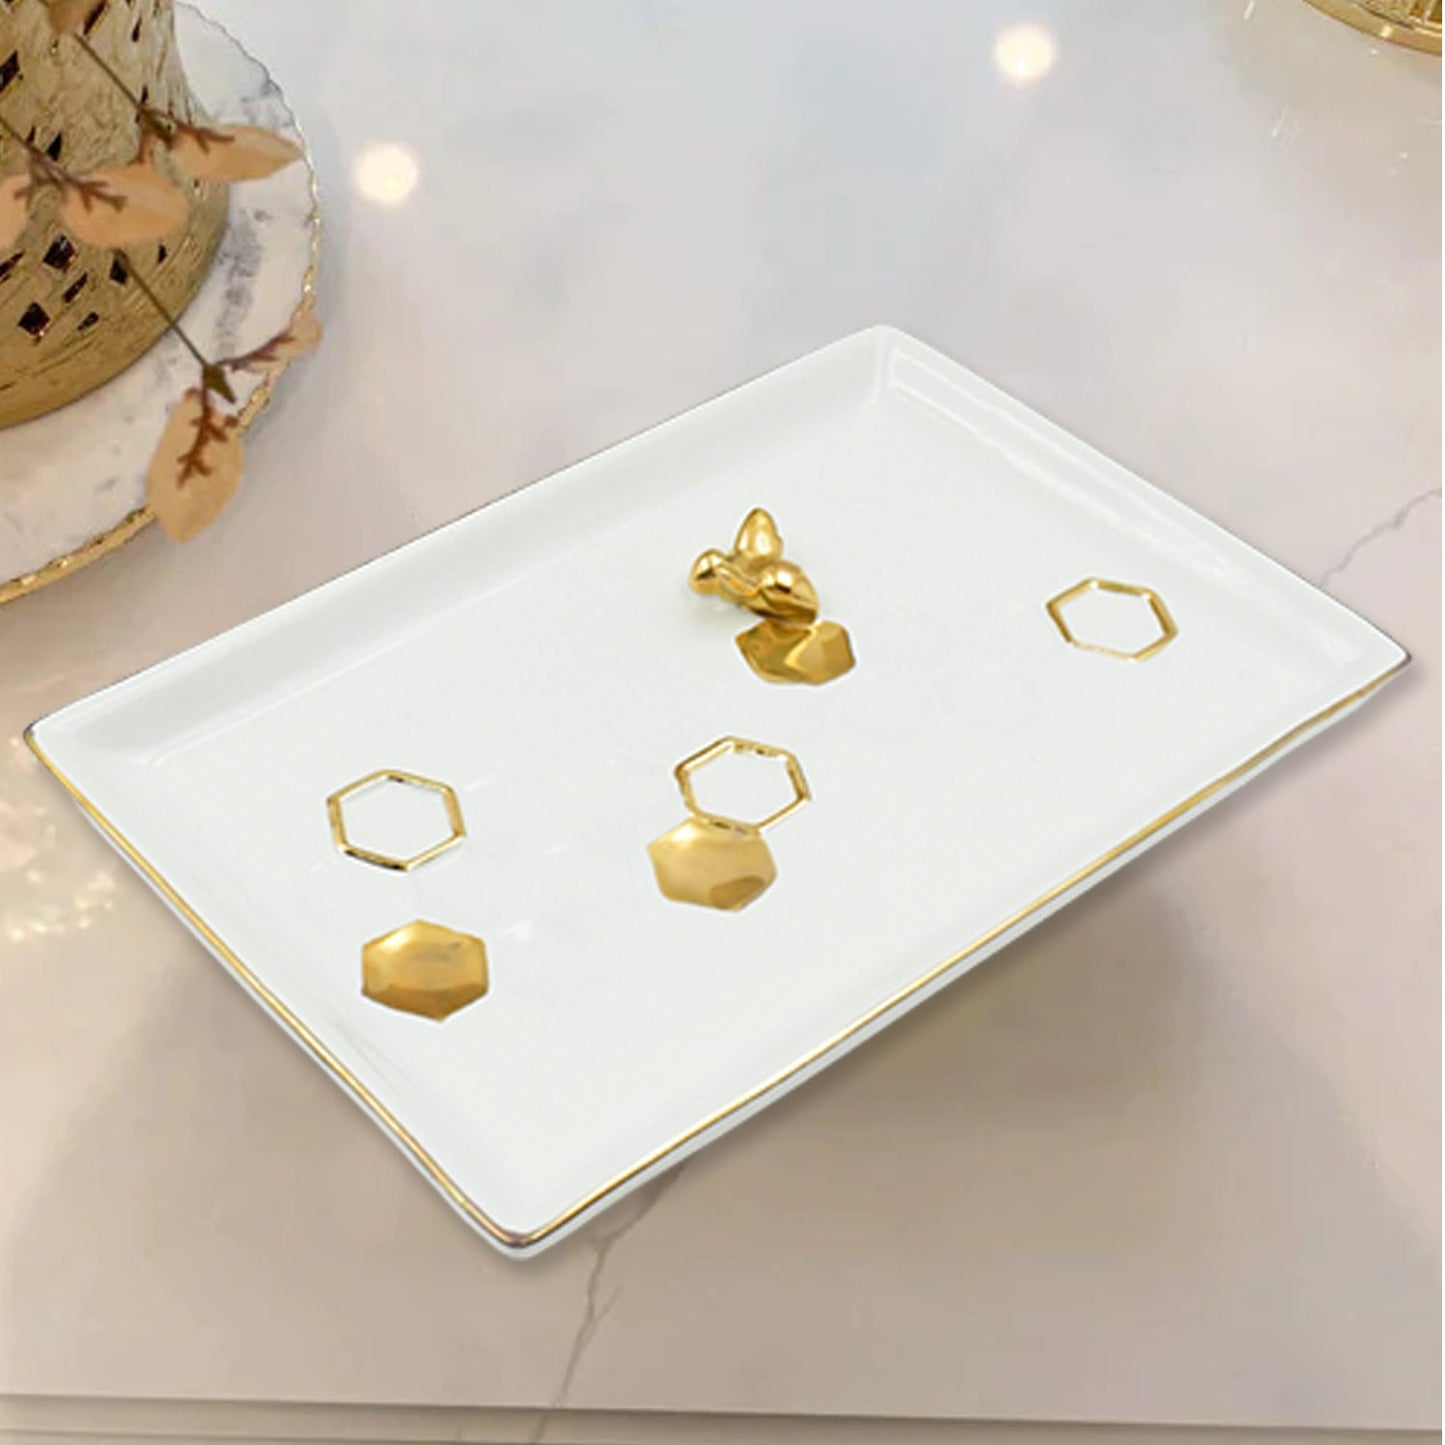 5806 Ceramic Square Plate / Tray / Dish Decoration Home Tray Tableware Decoration Plate For Kitchen Coffee Table Perfume Living Room Mini Bars Snacks, for Decorration Square Plate (1 Pc)